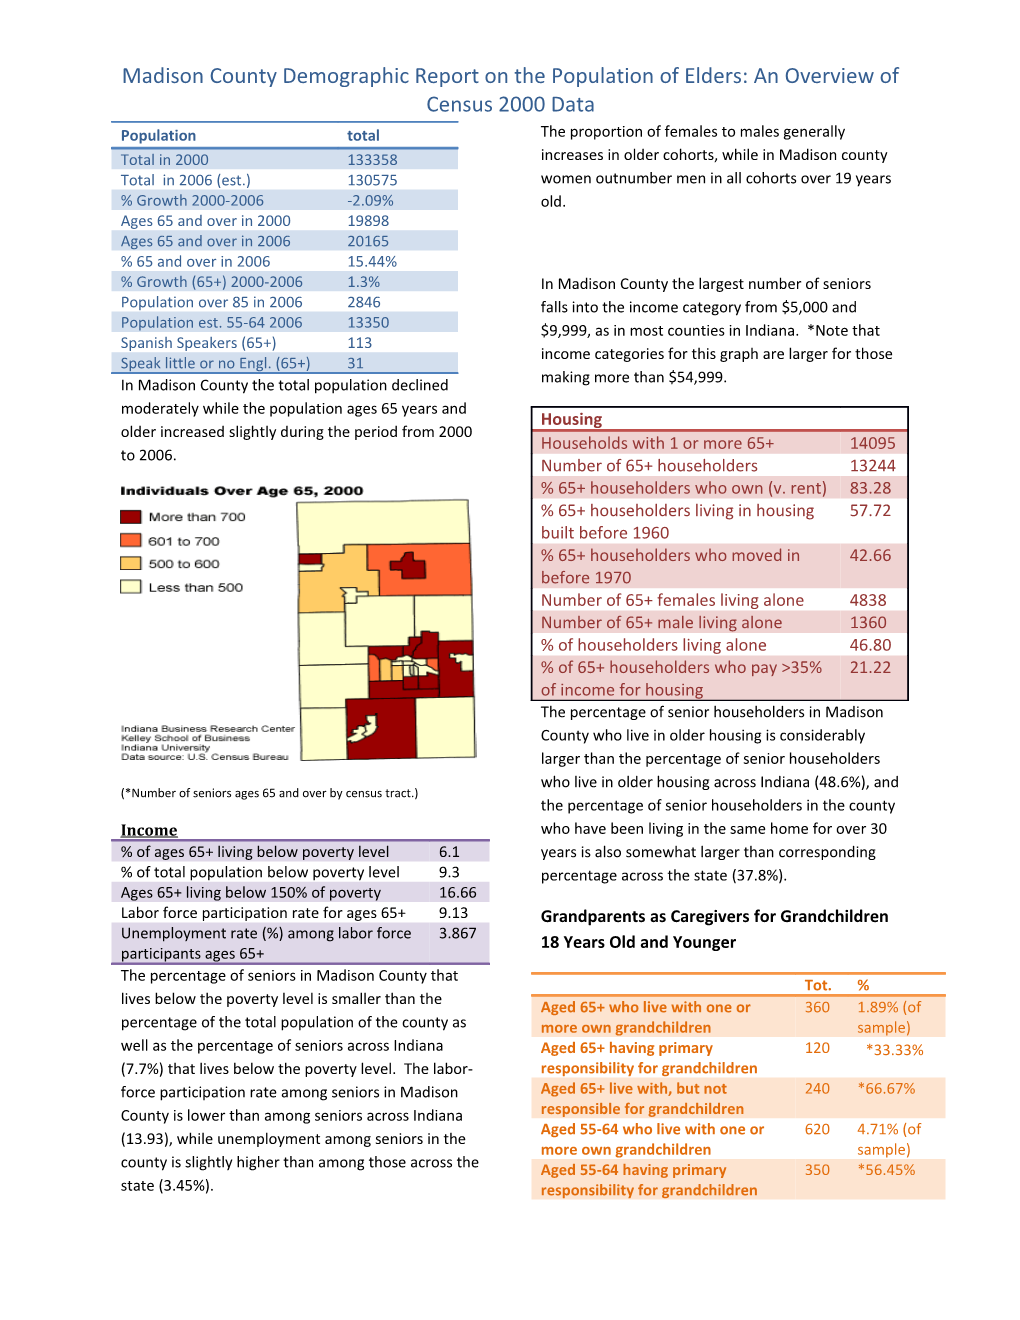 Madison County Demographic Report on the Population of Elders: an Overview of Census 2000 Data